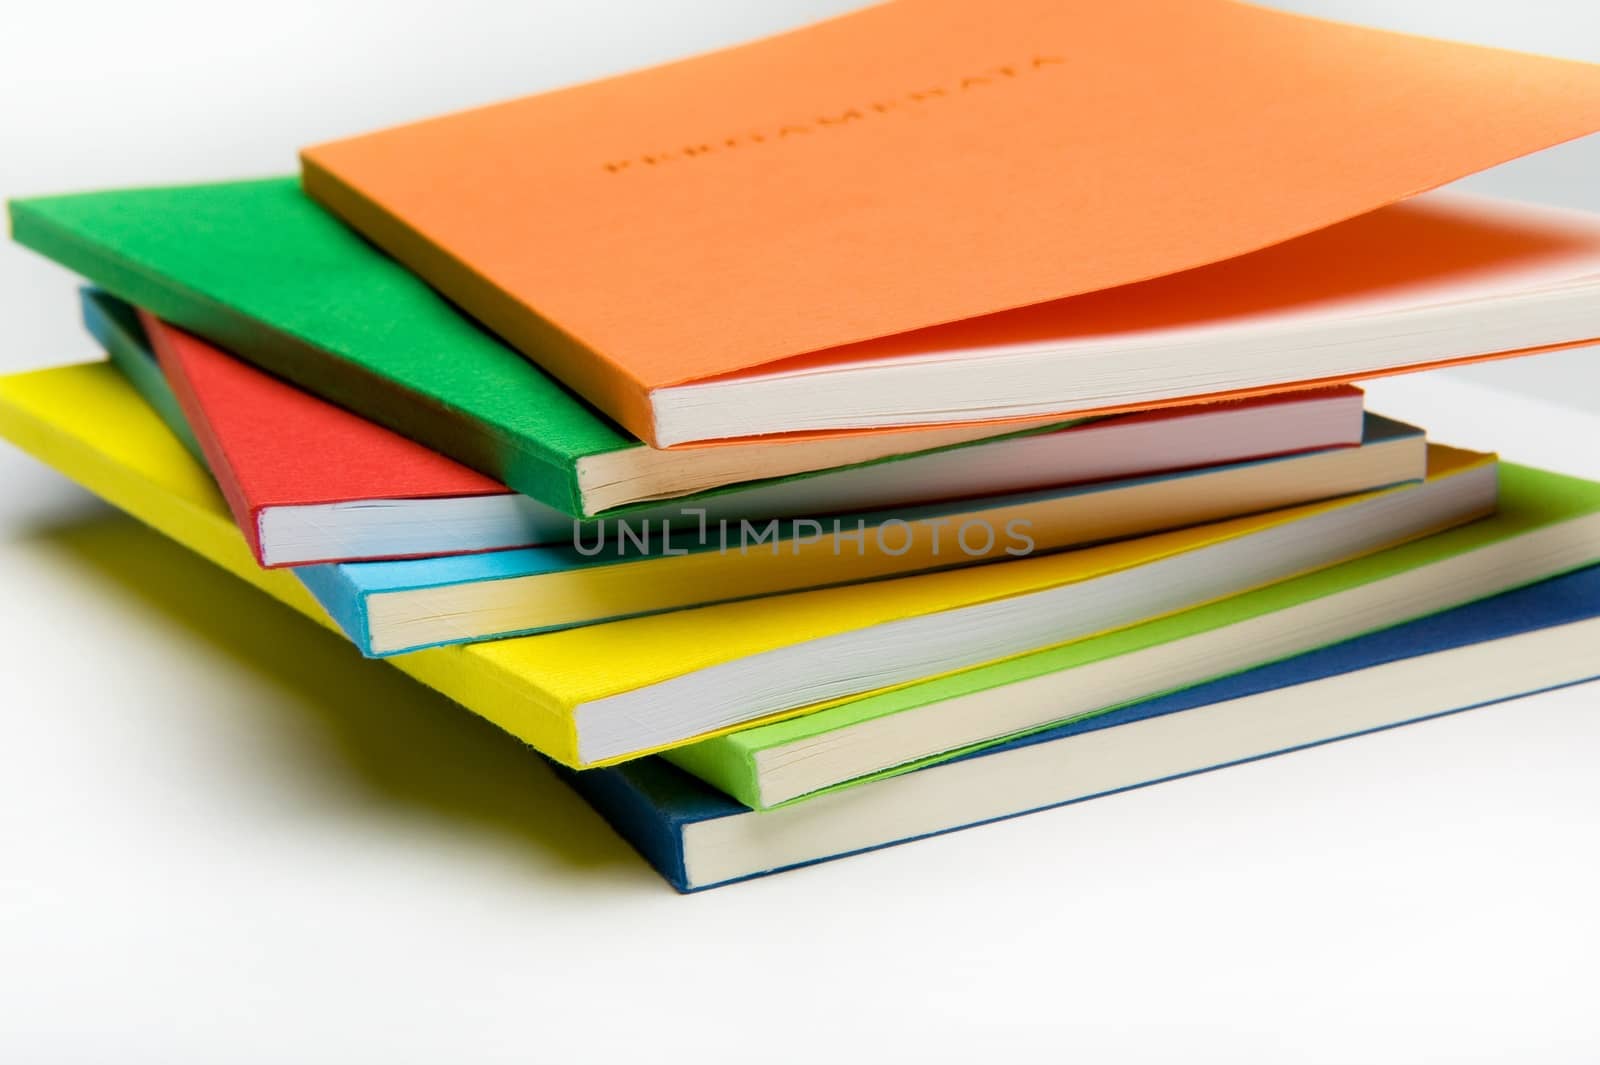 Horizontal shot of seven vibrantly colored workbooks isolated on the white background